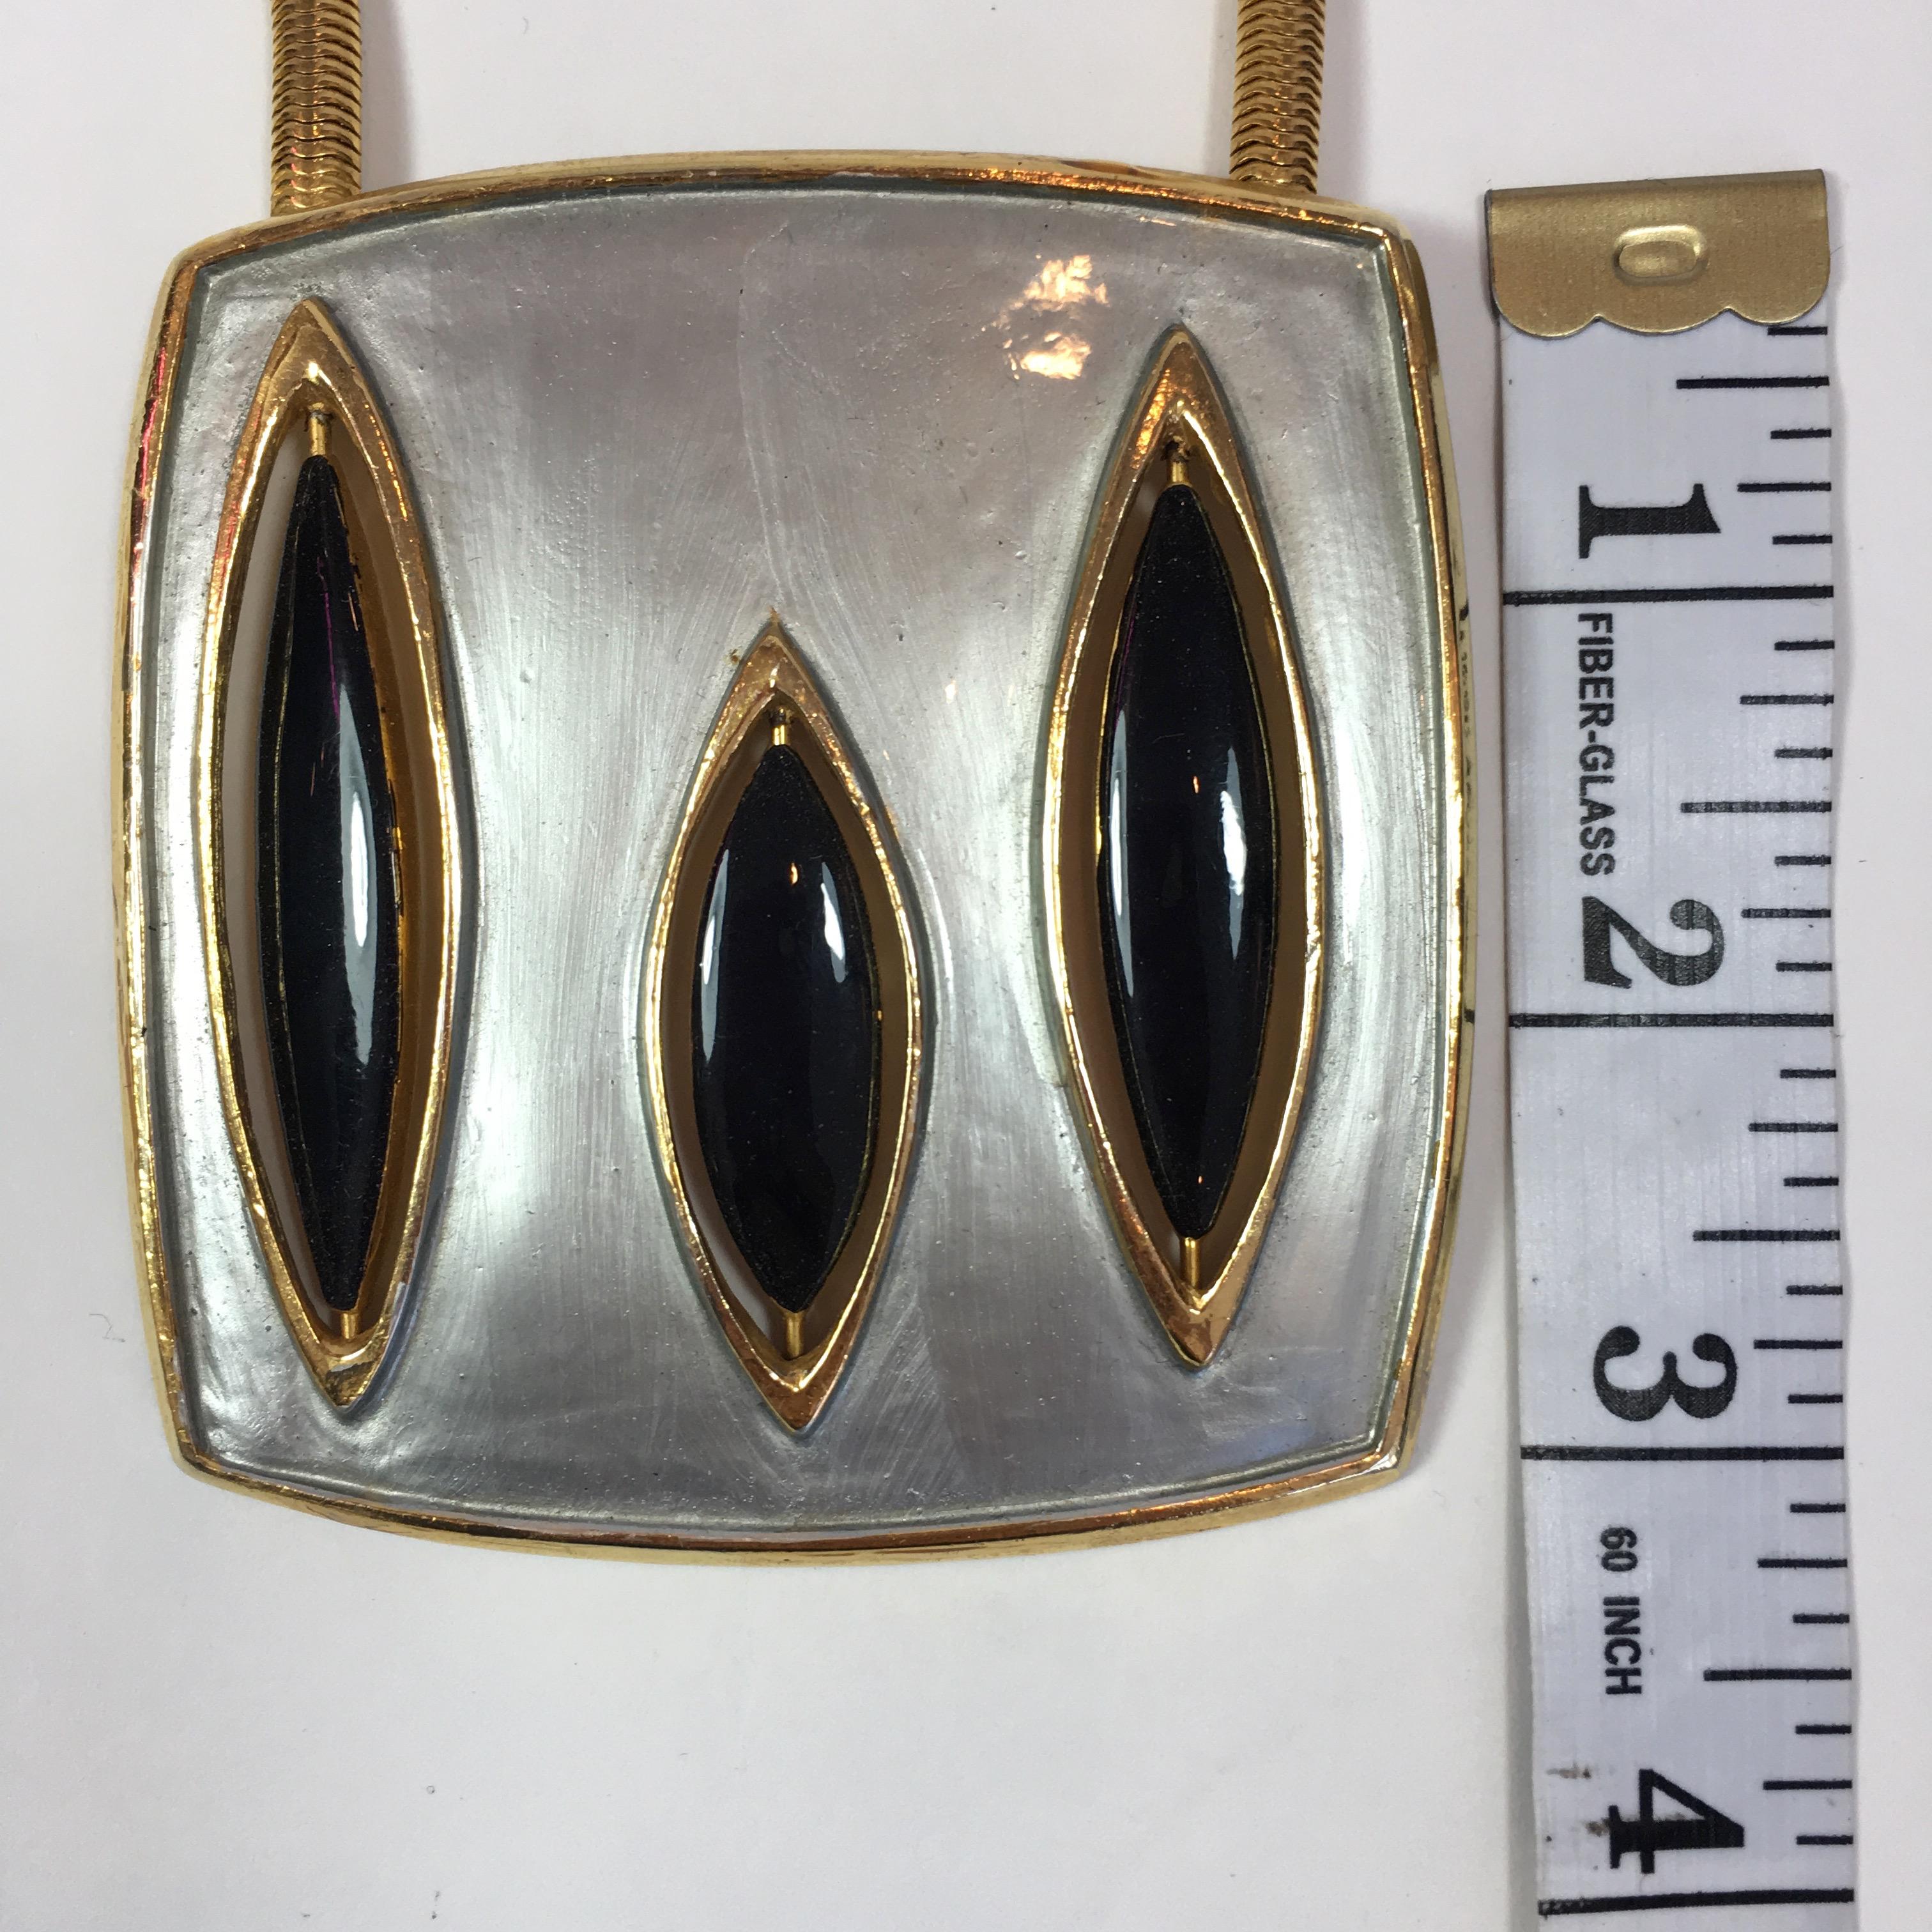 Modernist Pierre Cardin Mid-Century Modern Gold Tone and Enamel Necklace For Sale